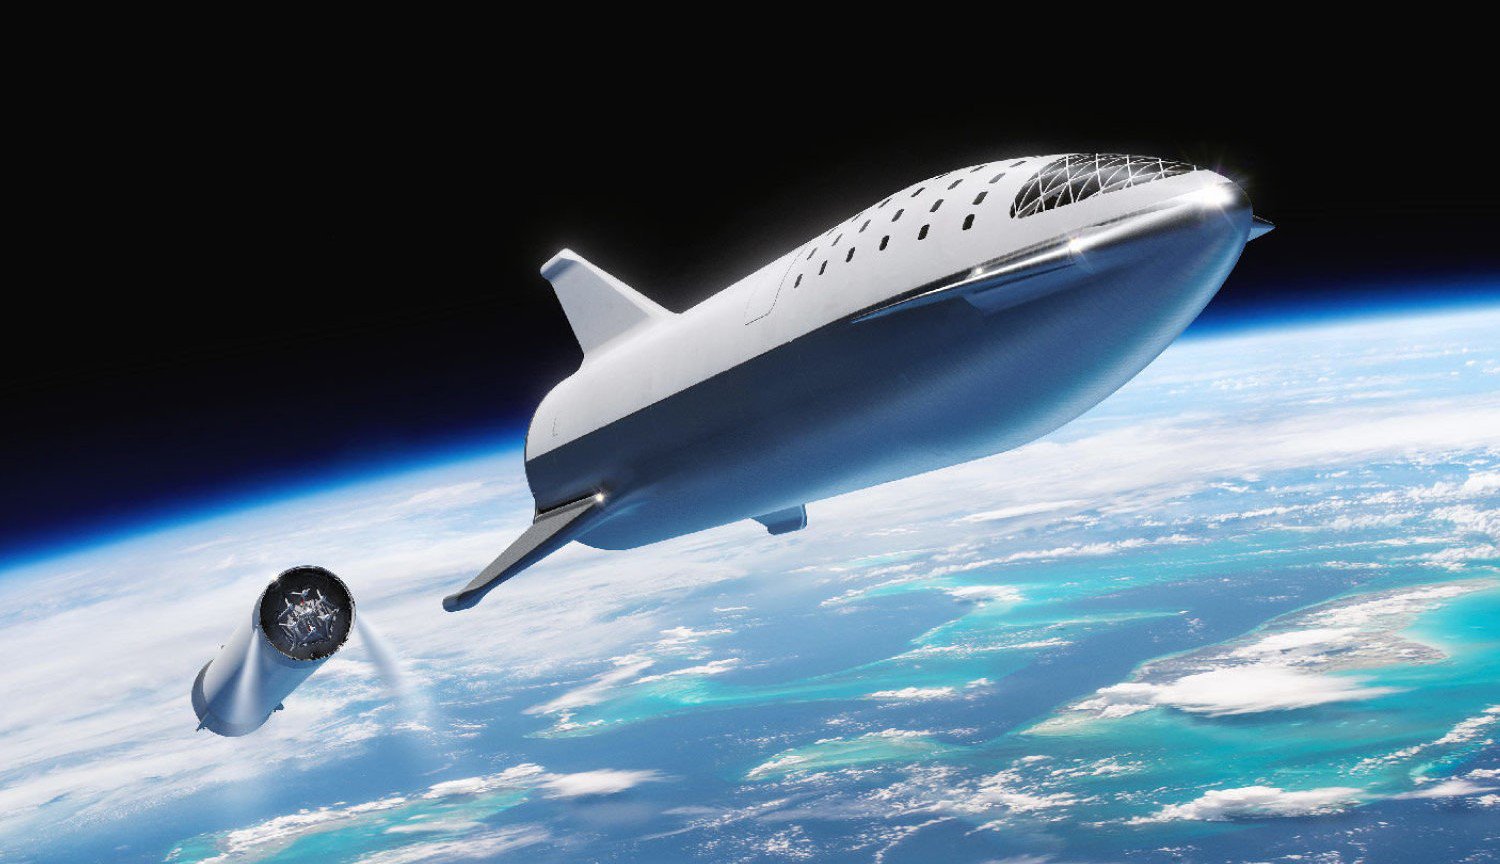 SpaceX has tested the thermal protection of spacecraft Starship